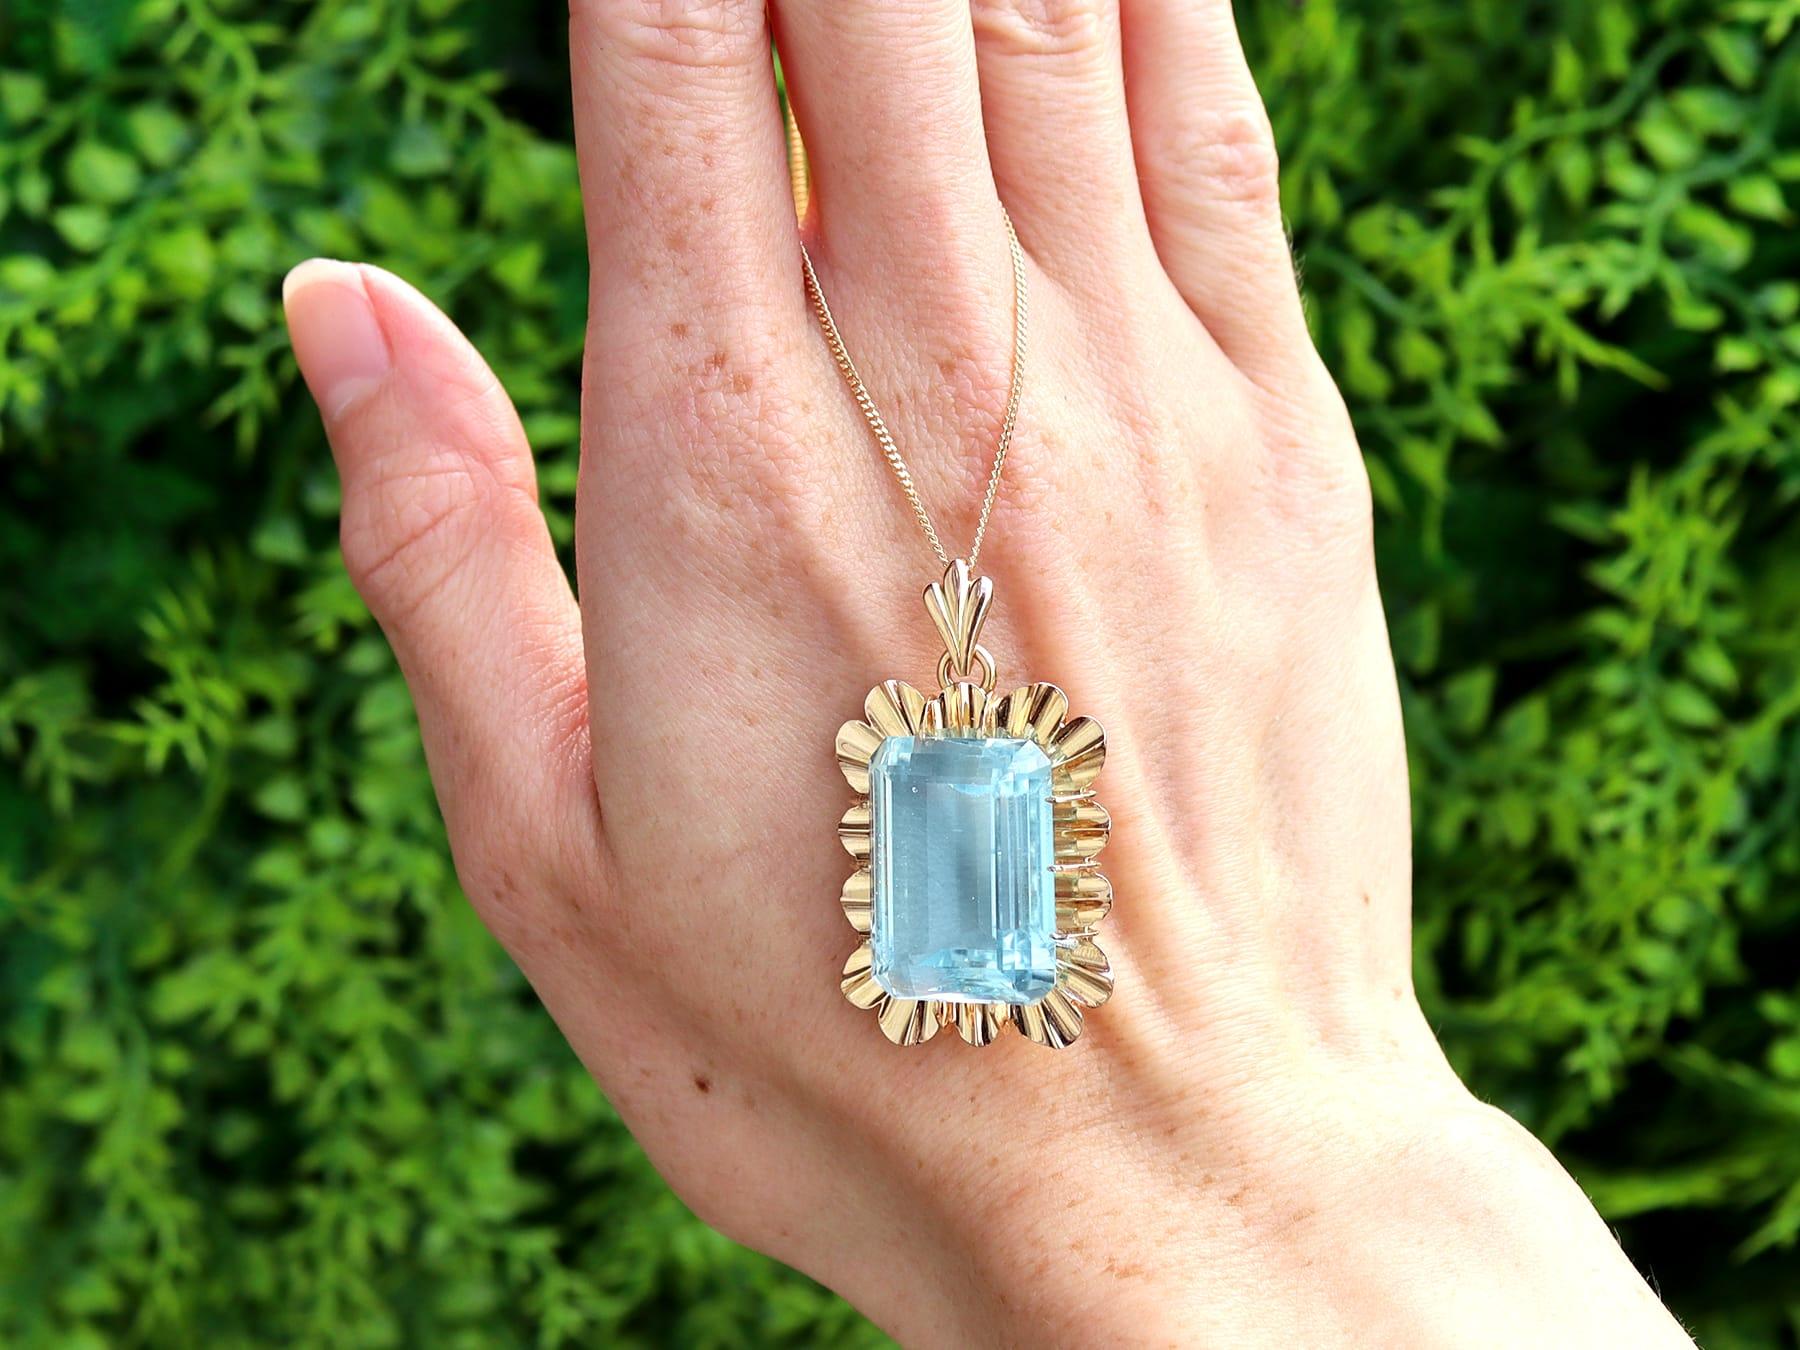 A stunning, fine and impressive, large 23.66 carat aquamarine and 18 karat yellow gold pendant; part of our diverse aquamarine jewellery collections.

This stunning, fine and impressive aquamarine pendant has been crafted in 18k yellow gold.

The